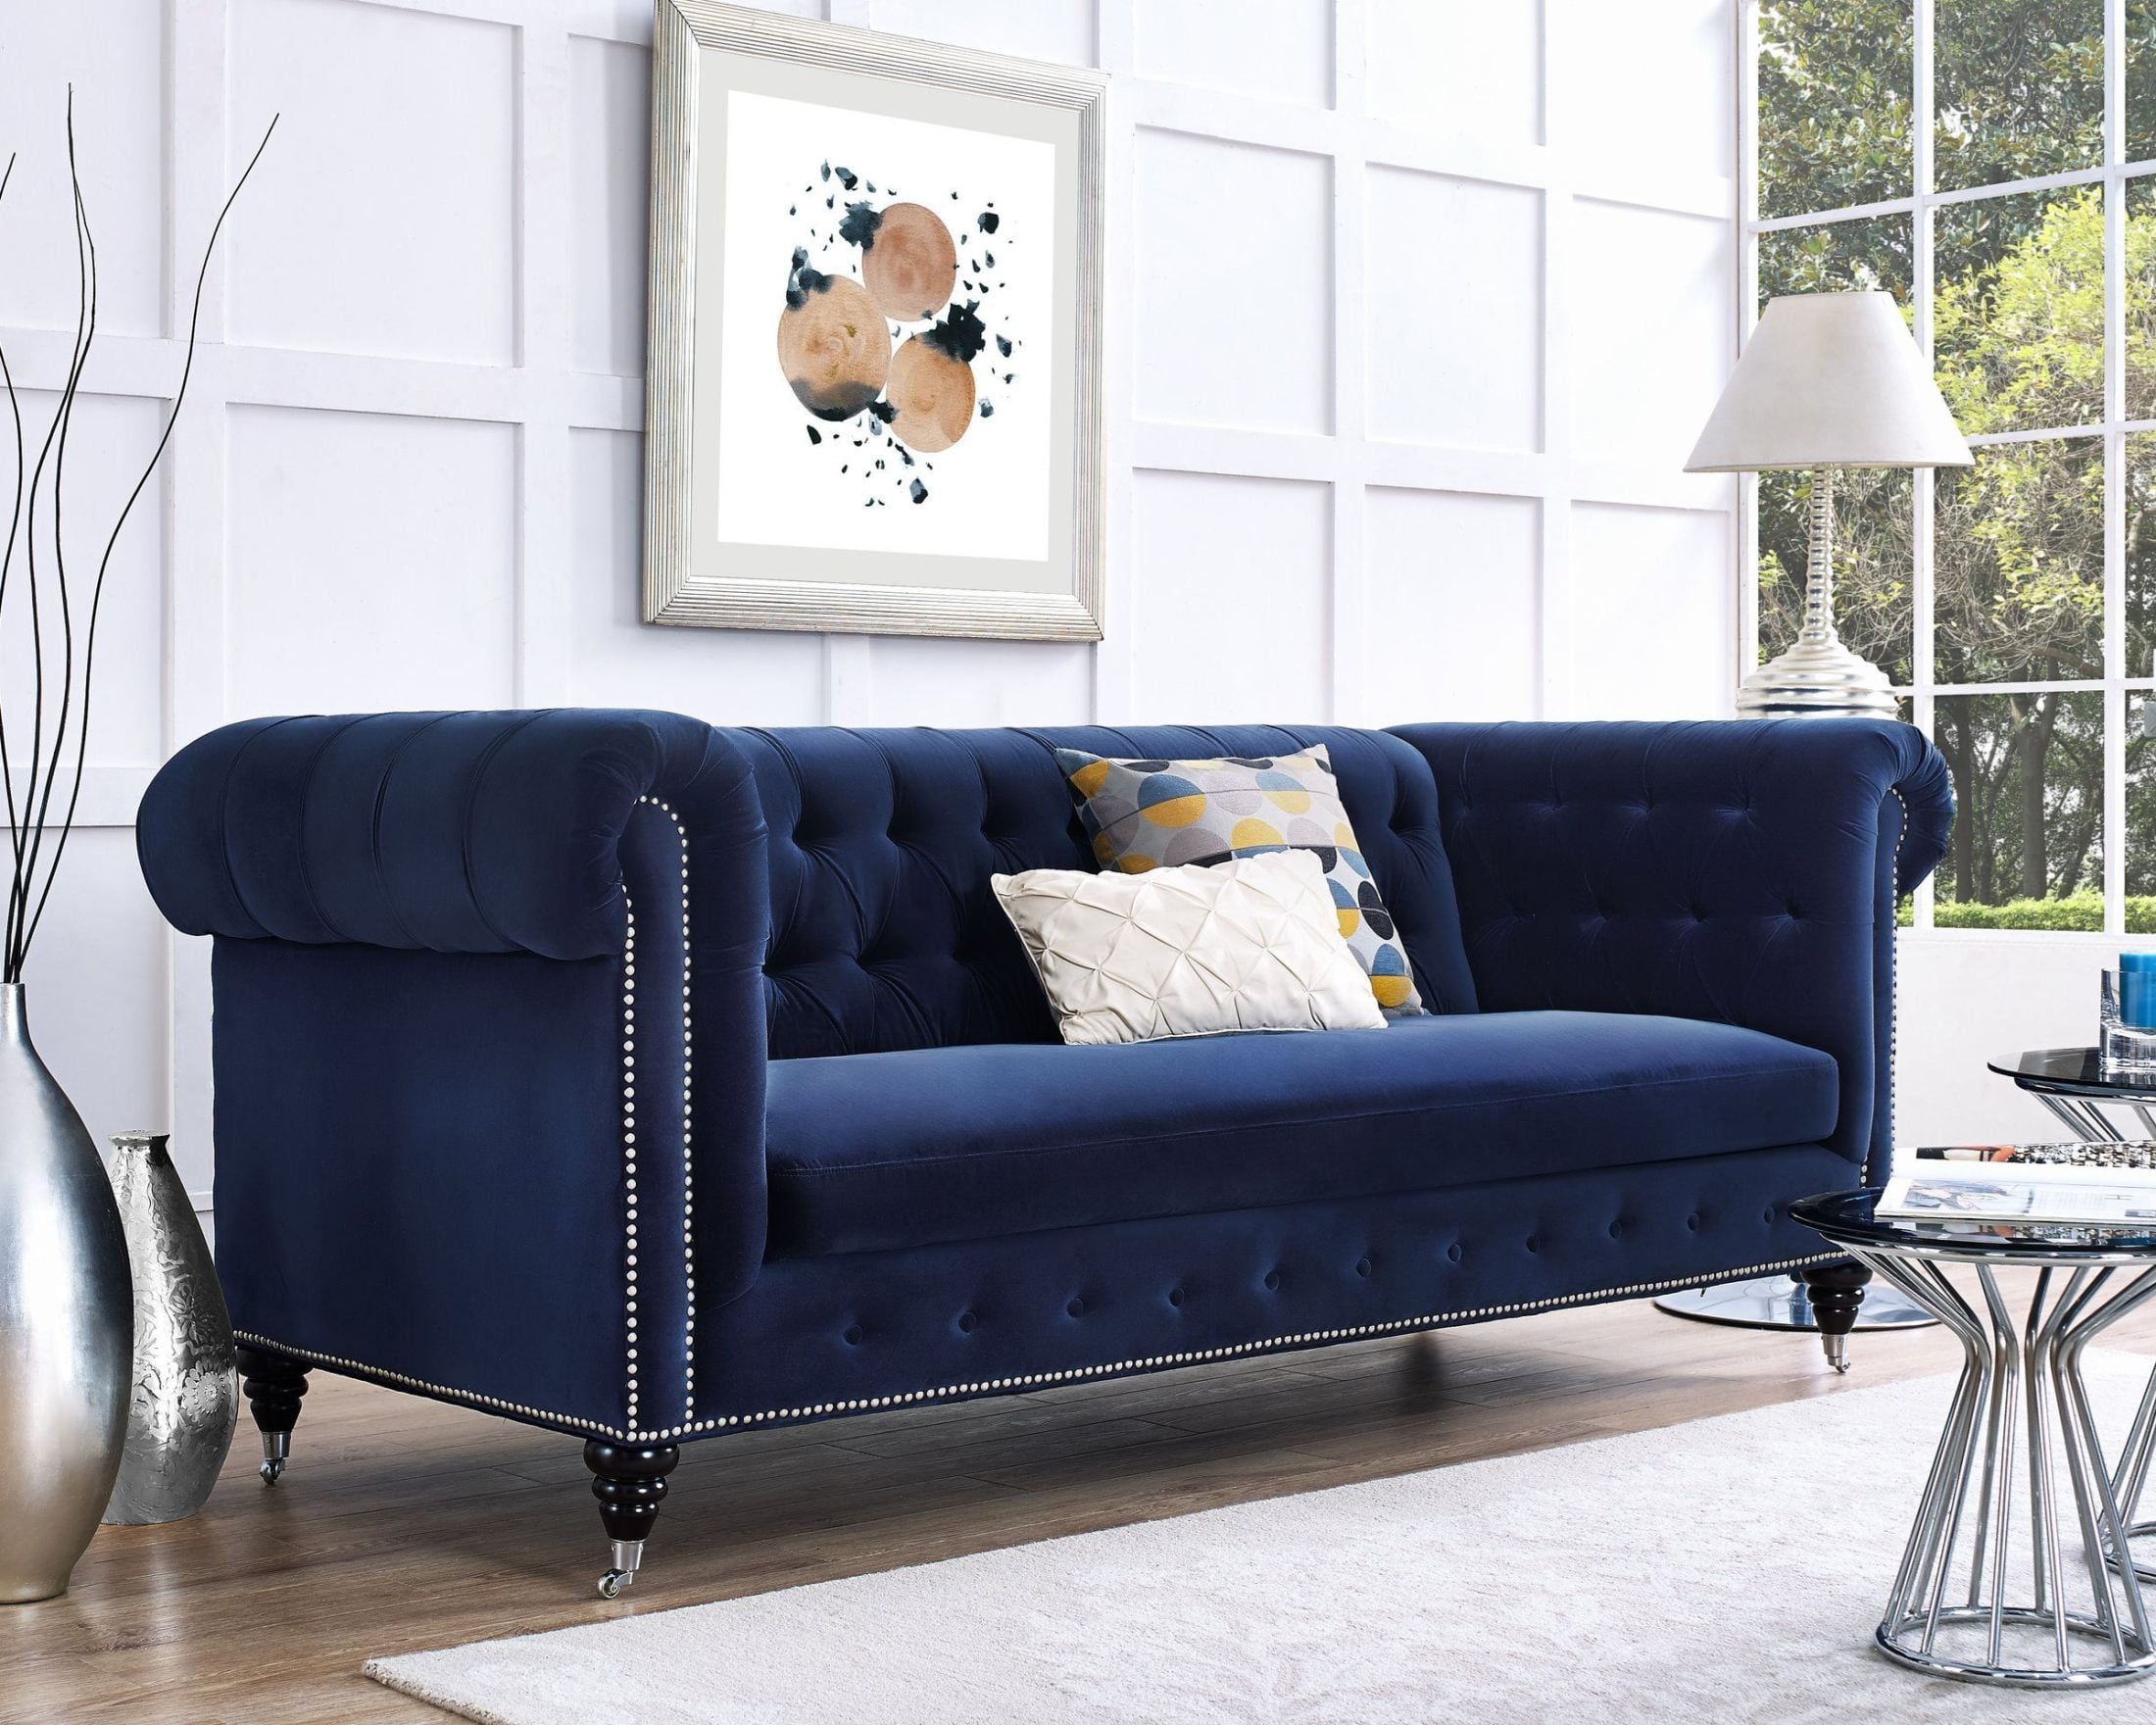 Hanny Navy Blue Velvet Sofa From Tov | Coleman Furniture For Sofas In Blue (Gallery 13 of 20)